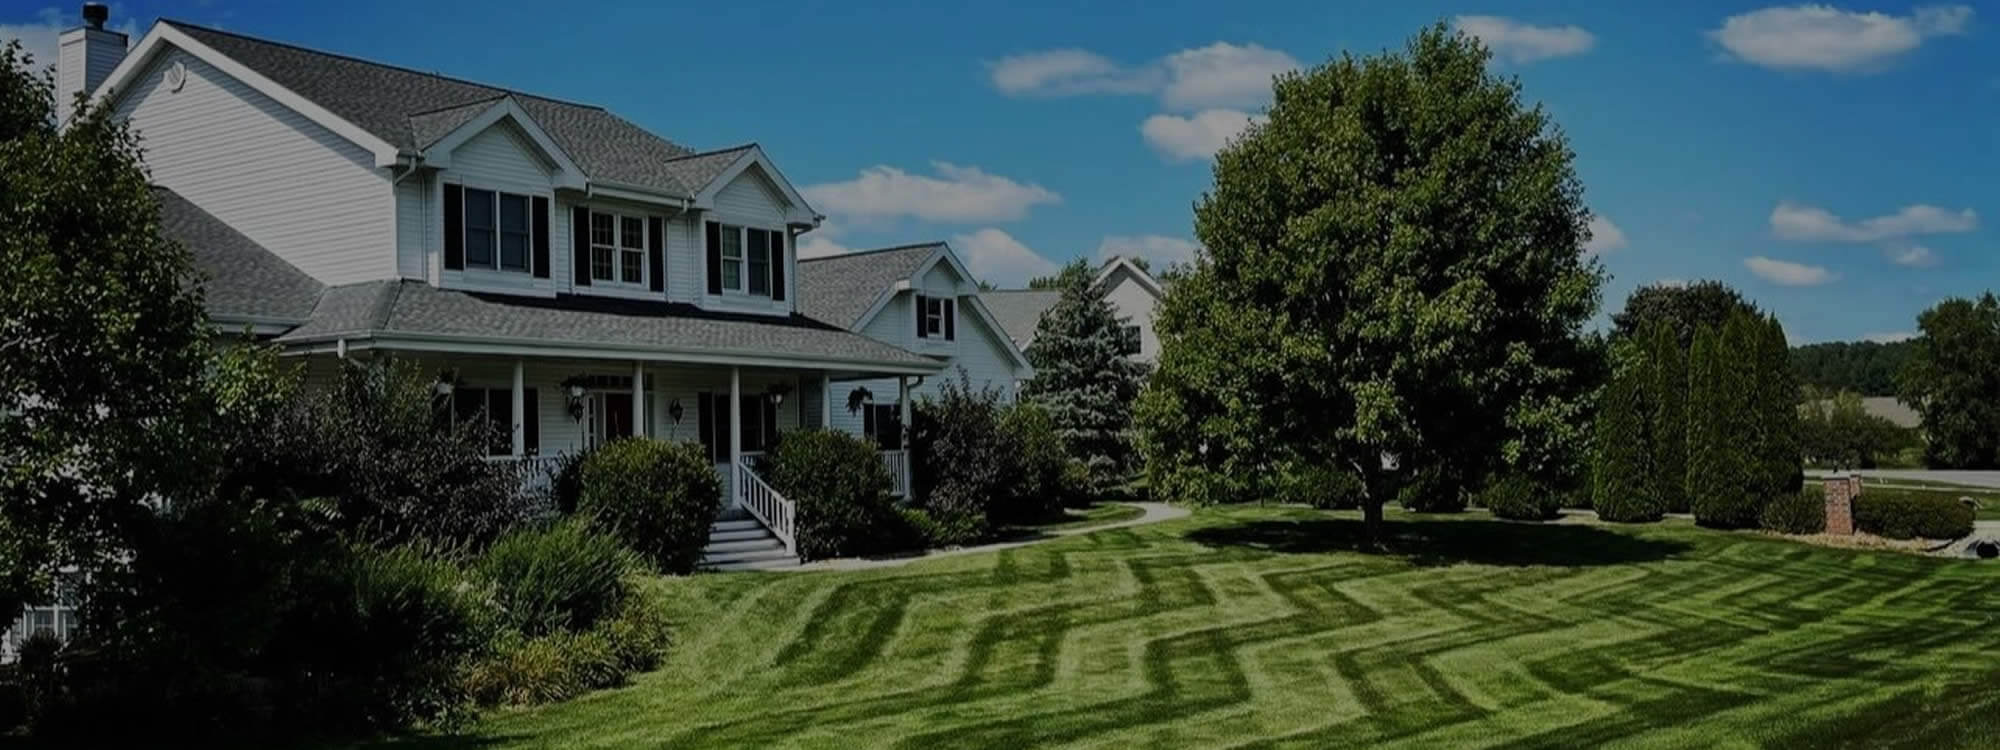 Lawn Care in Madison WI